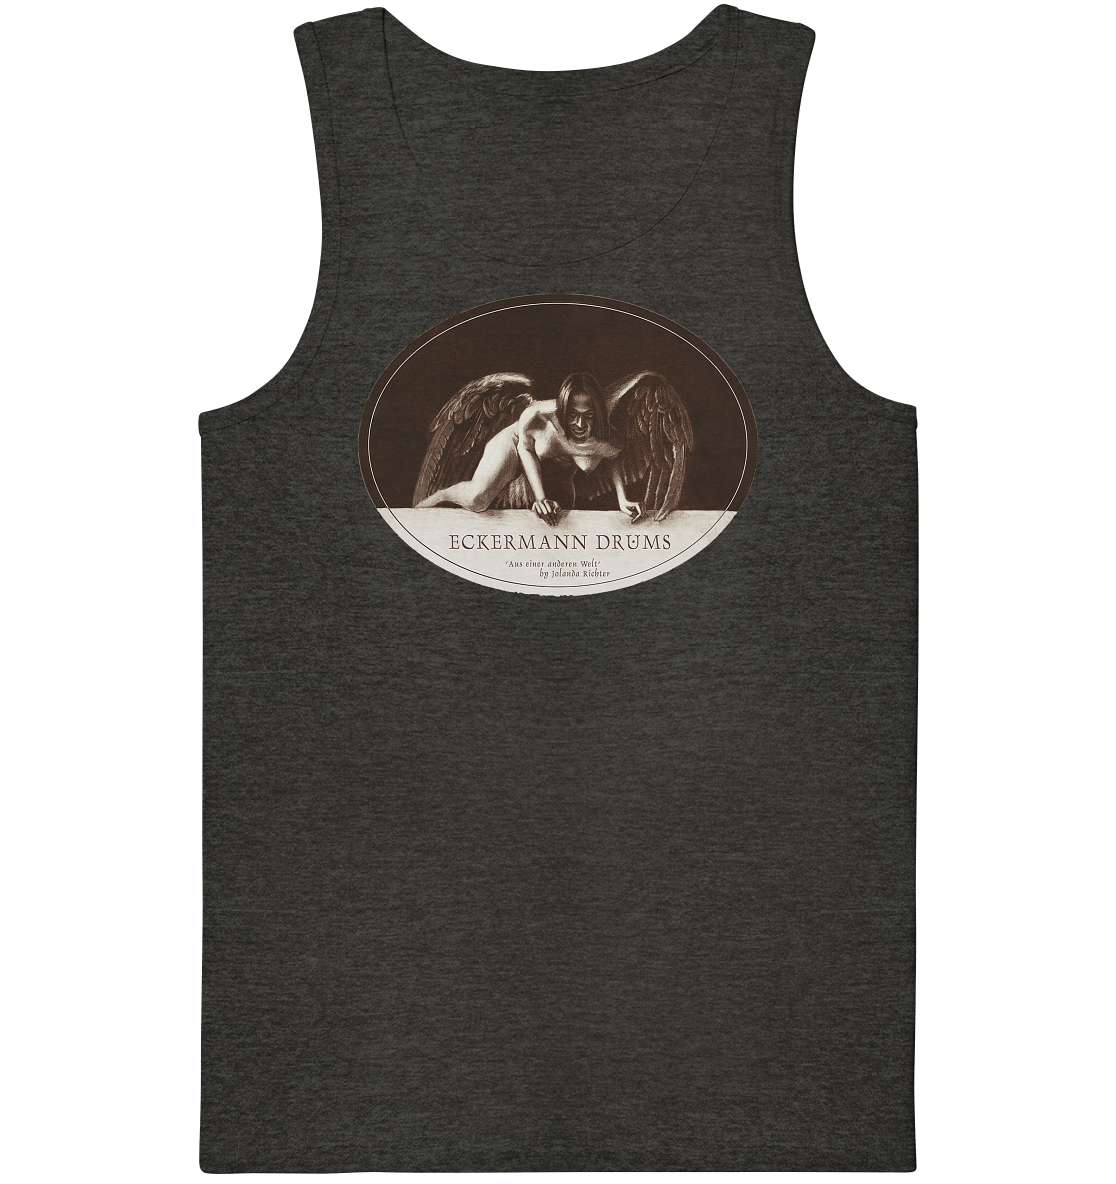 Eckermann DRUMS - "From Another World" - Organic Tank-Top